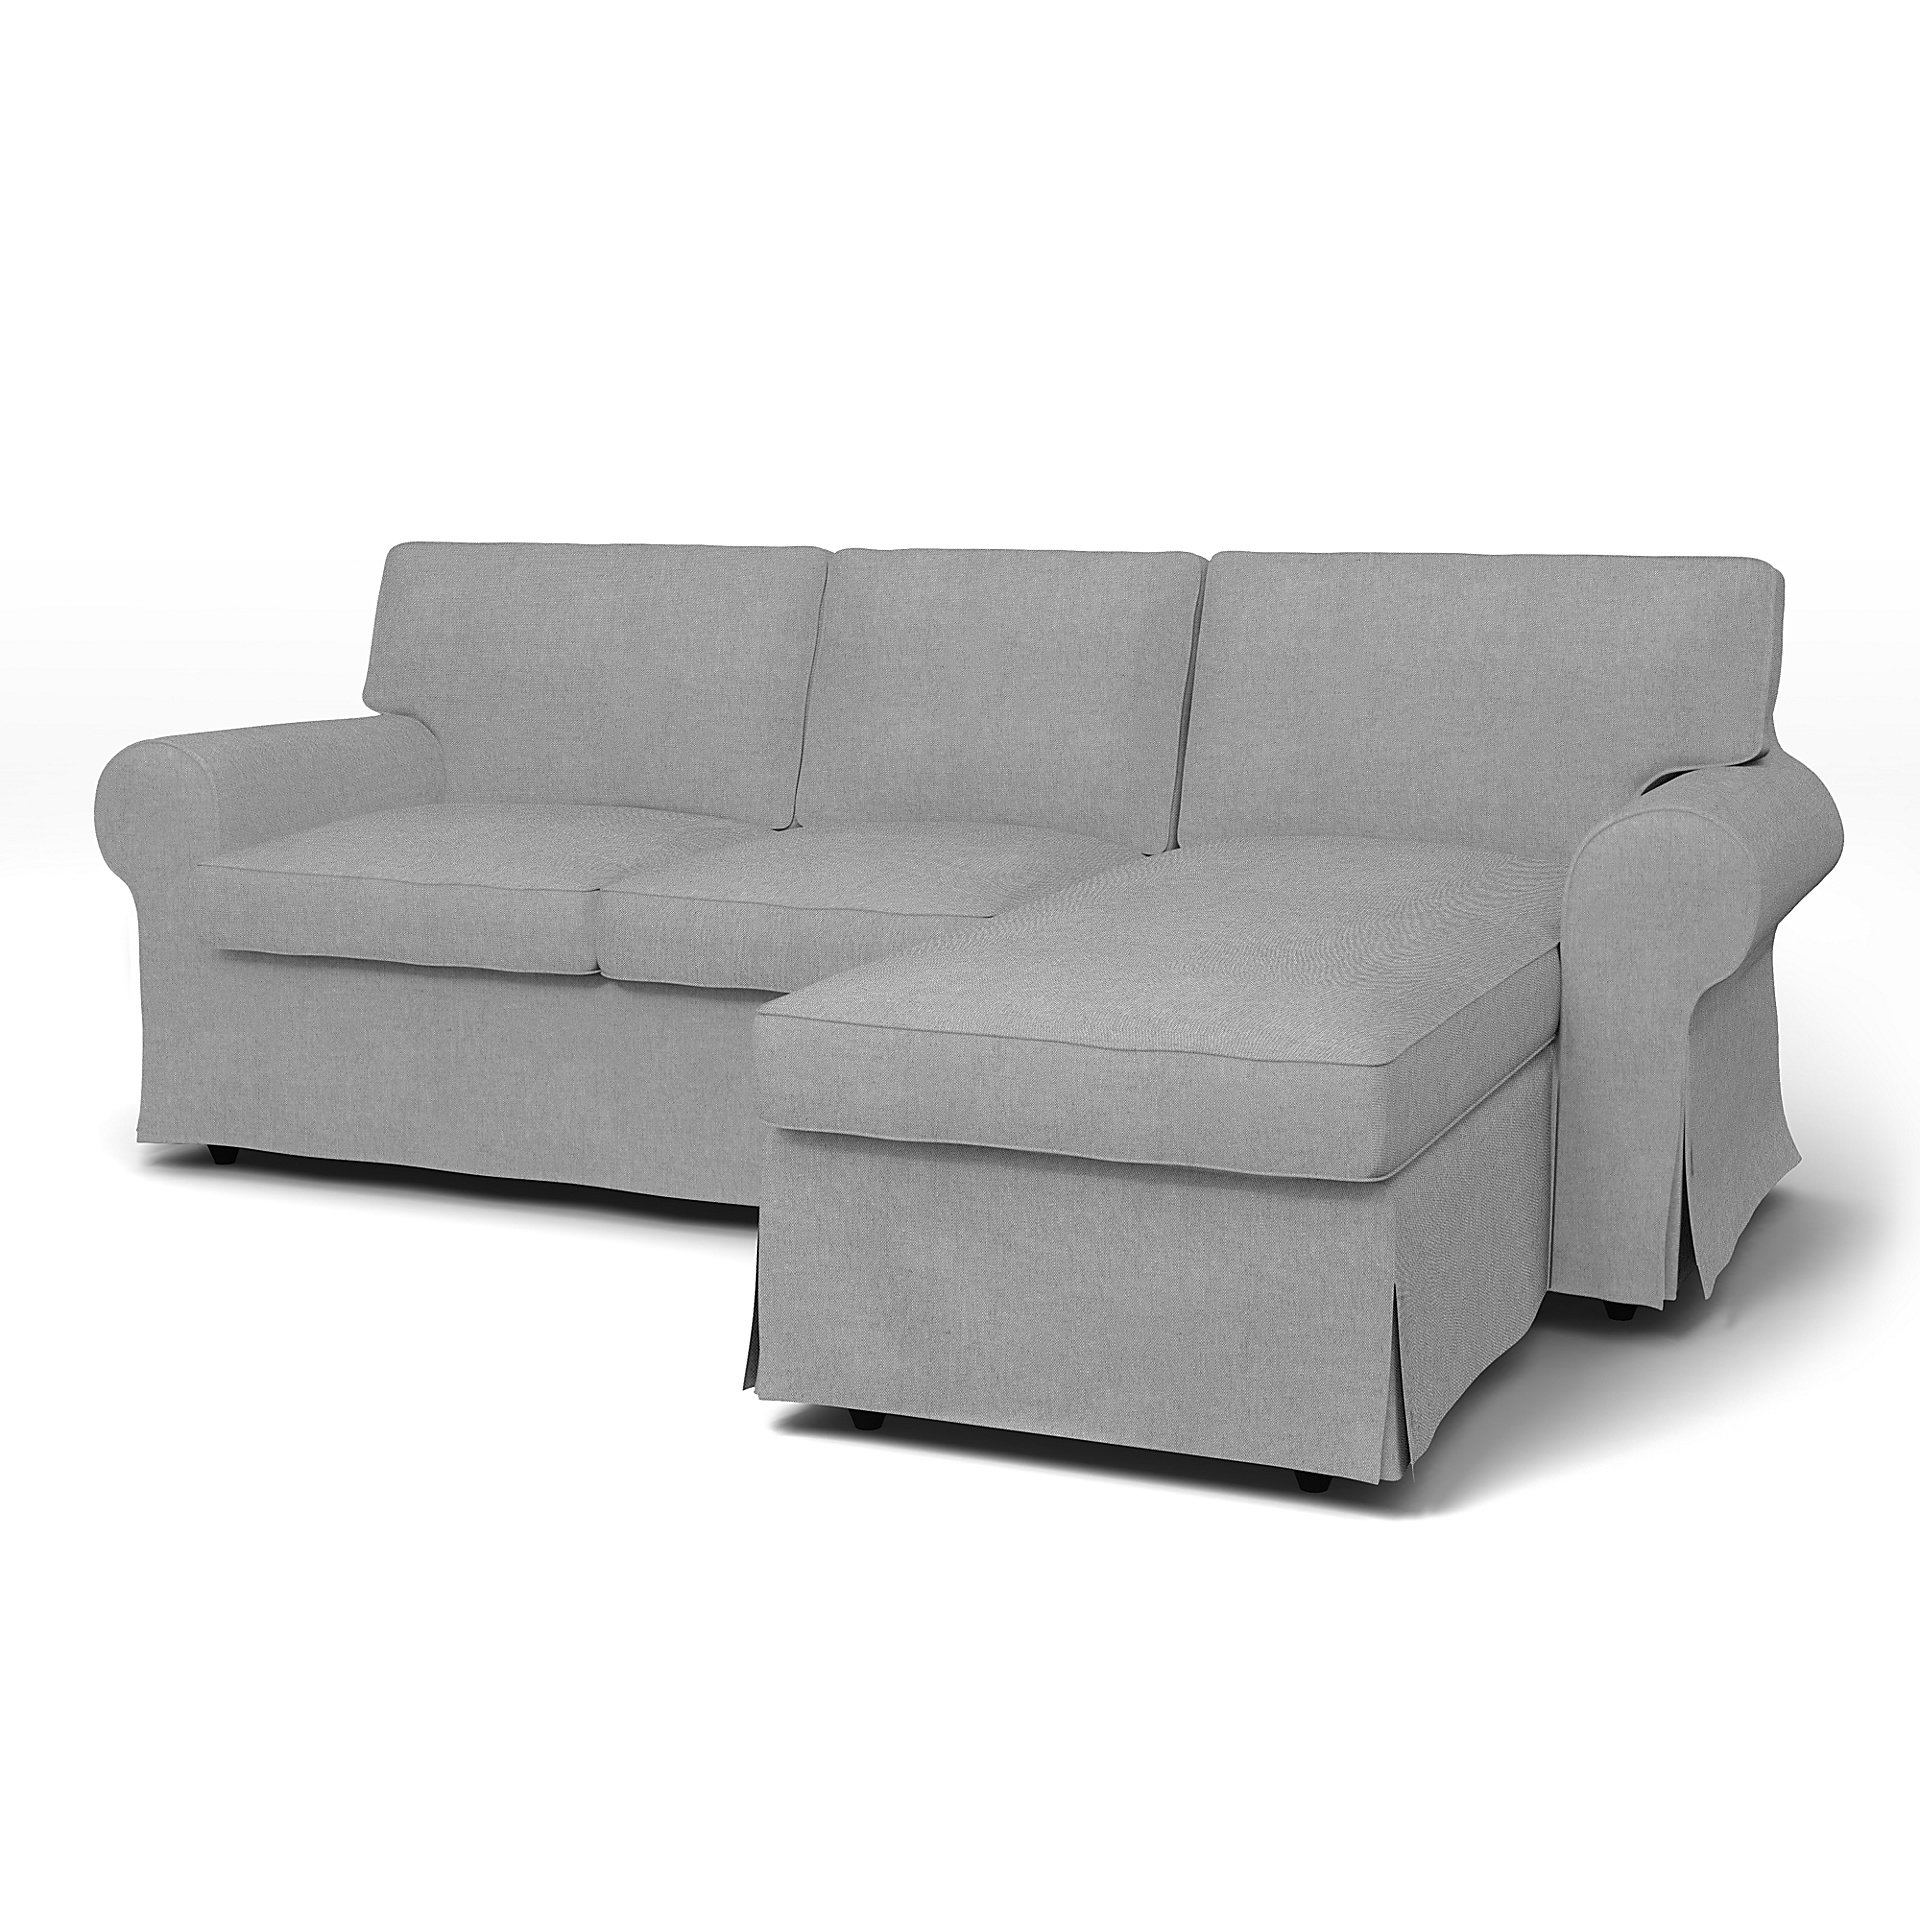 IKEA - Ektorp 3 Seater Sofa with Chaise Cover, Graphite, Linen - Bemz